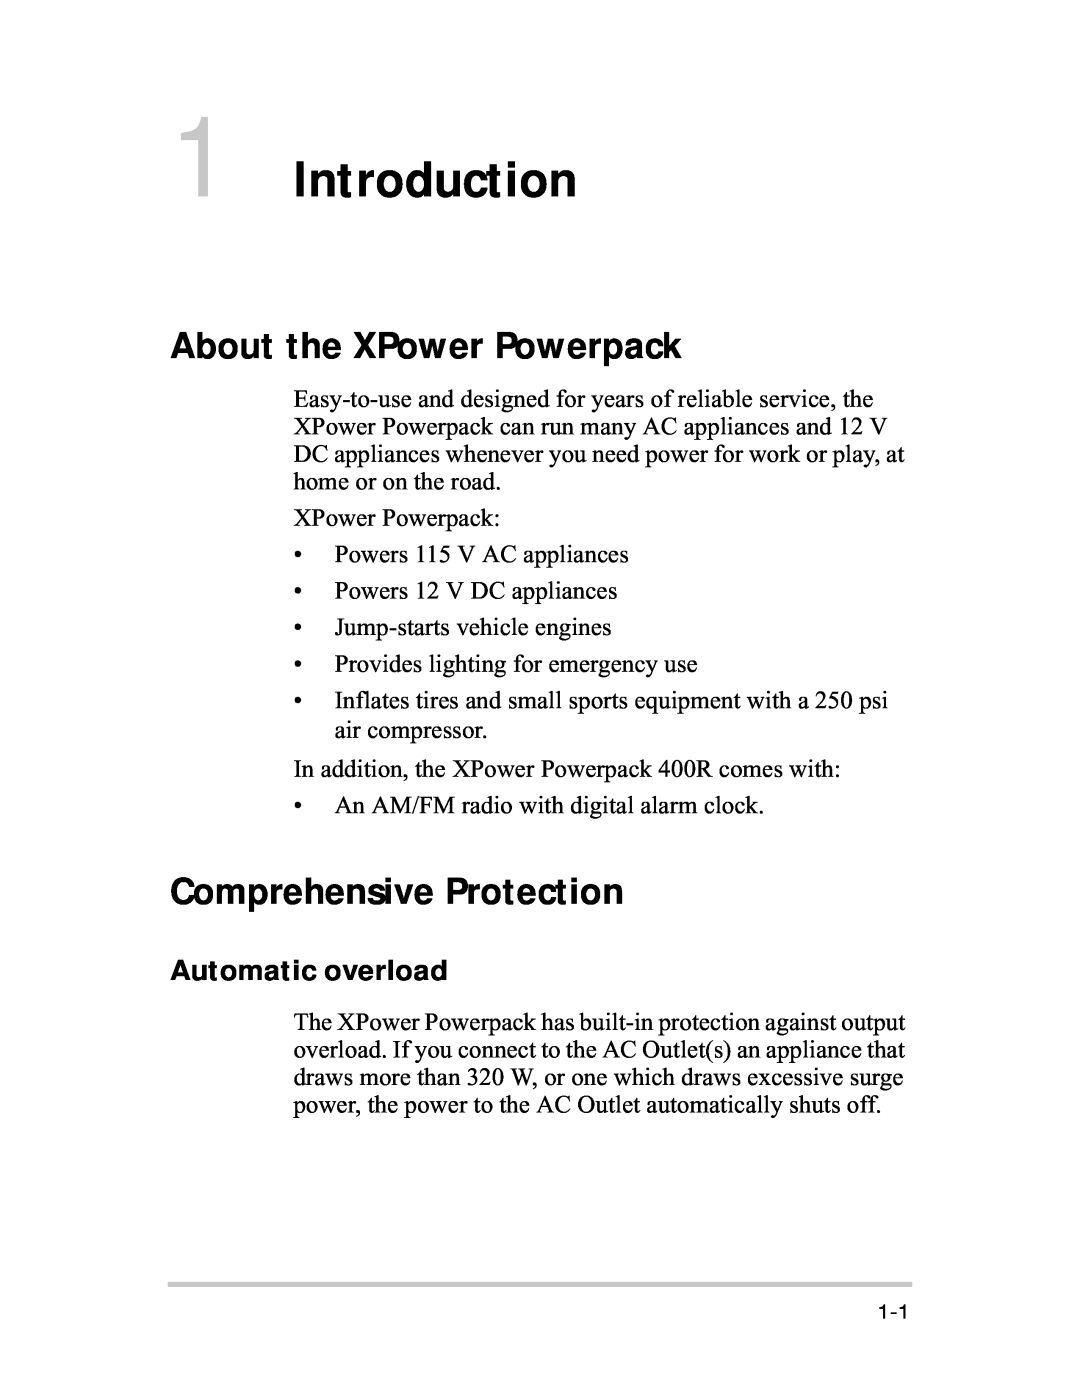 Xantrex Technology 400R manual Introduction, About the XPower Powerpack, Comprehensive Protection, Automatic overload 